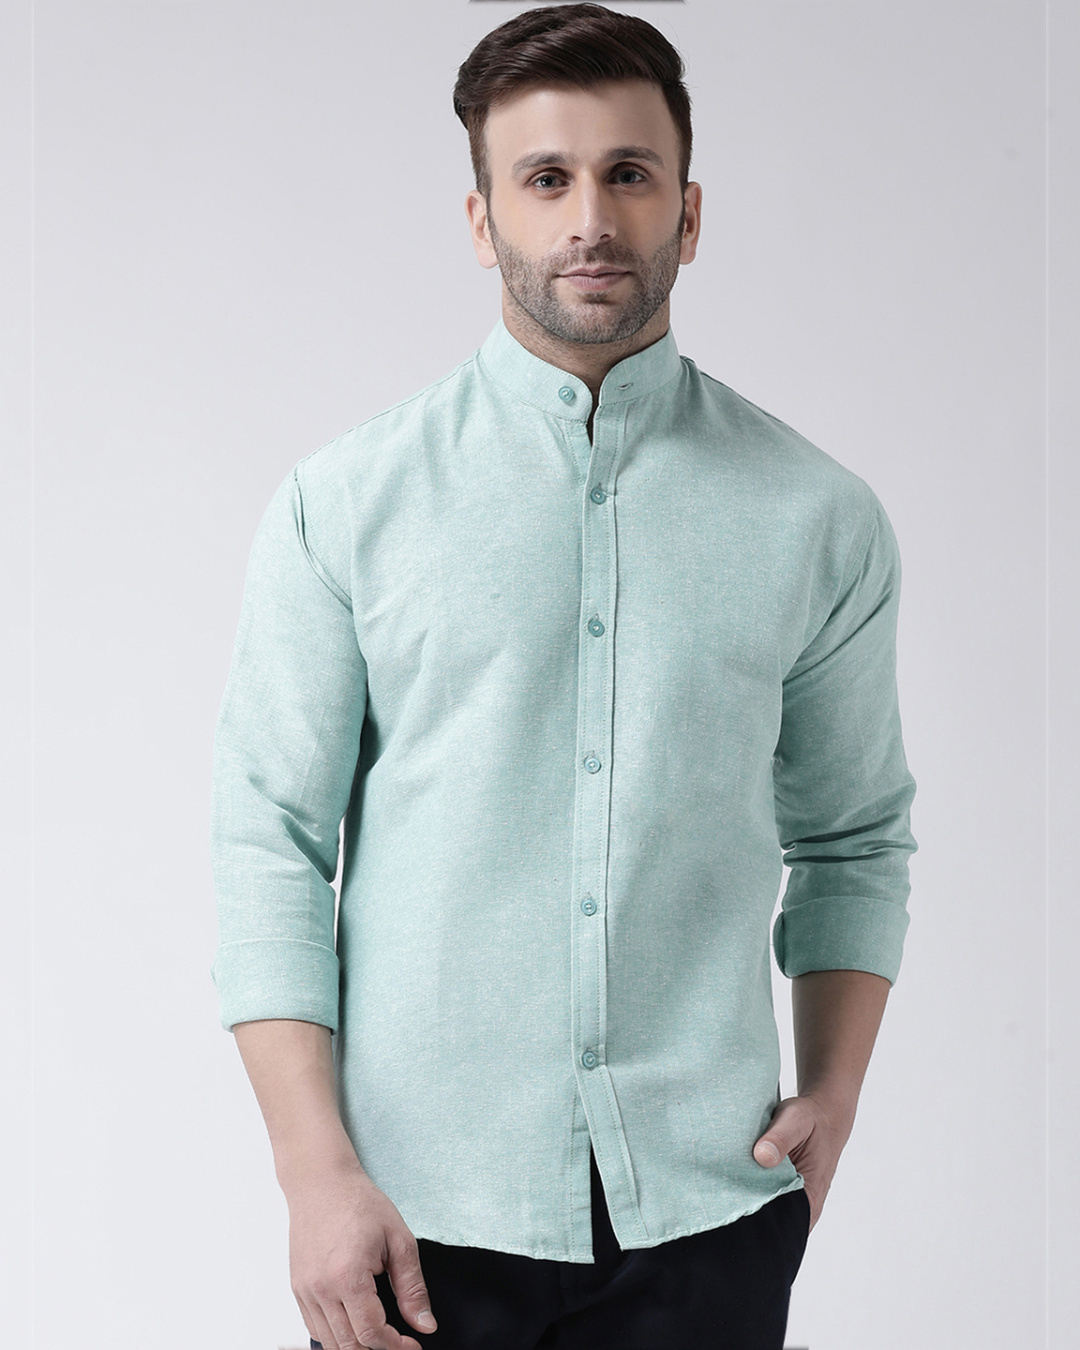 Buy Riag Full Sleeves Cotton Casual Chinese Neck Shirt Online at Bewakoof